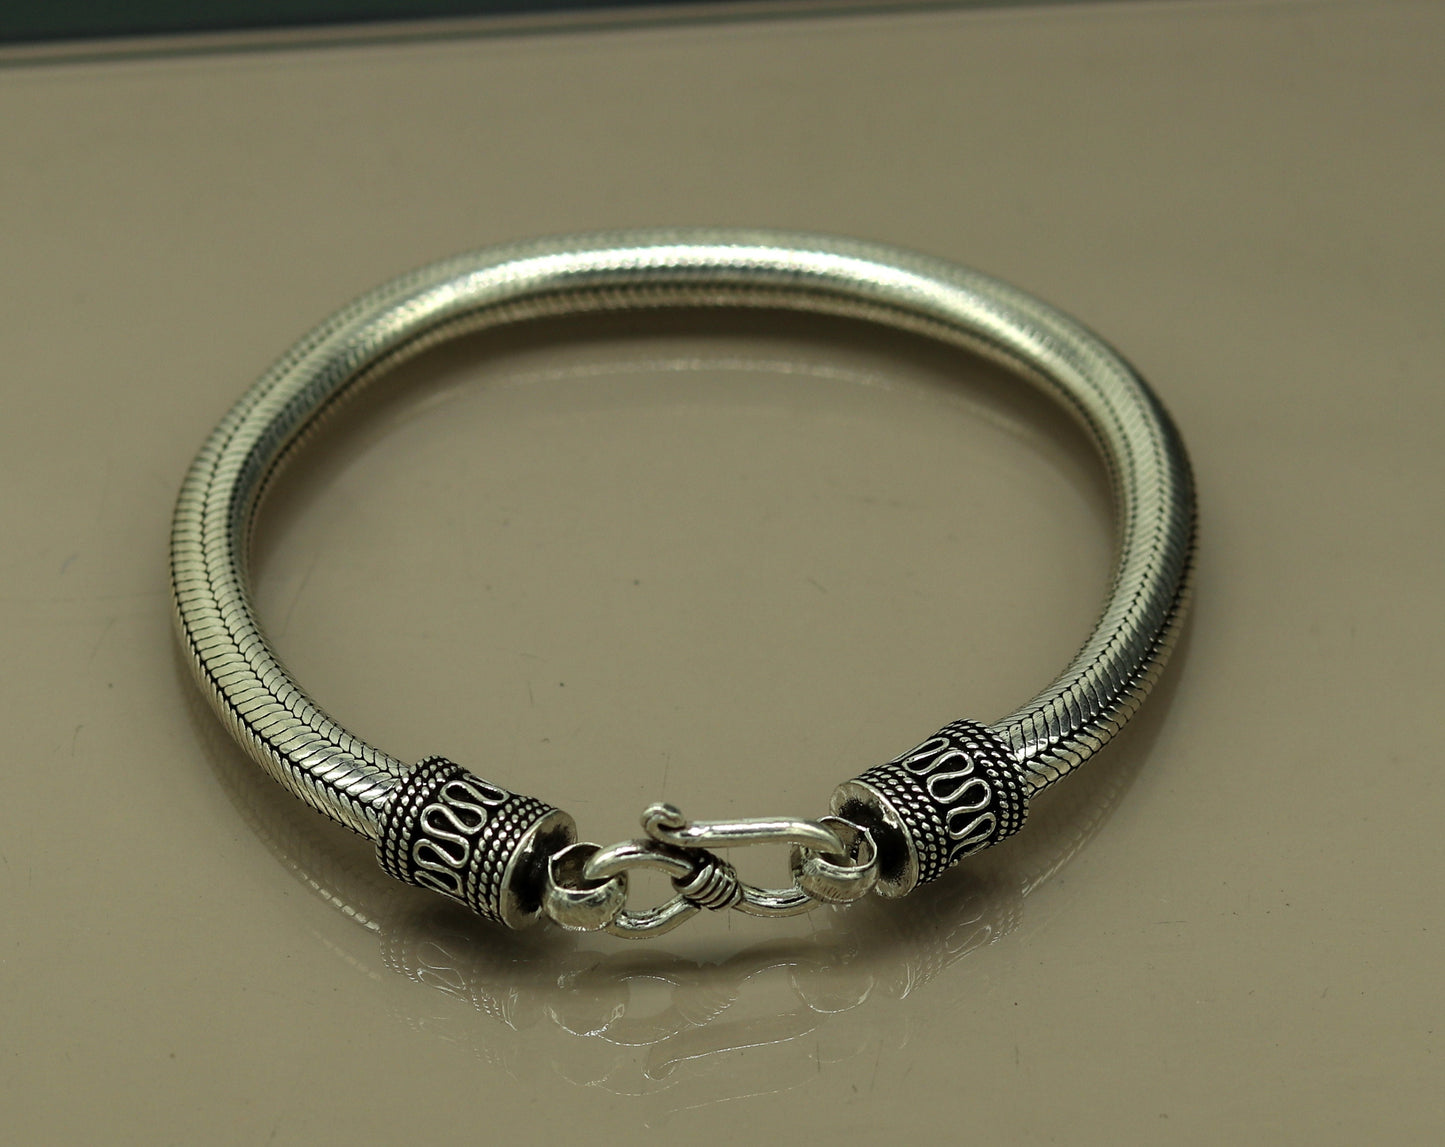 9" solid 925 sterling silver handmade snake chain heavy customized round design bracelet, personalized gifting jewelry sbr208 - TRIBAL ORNAMENTS